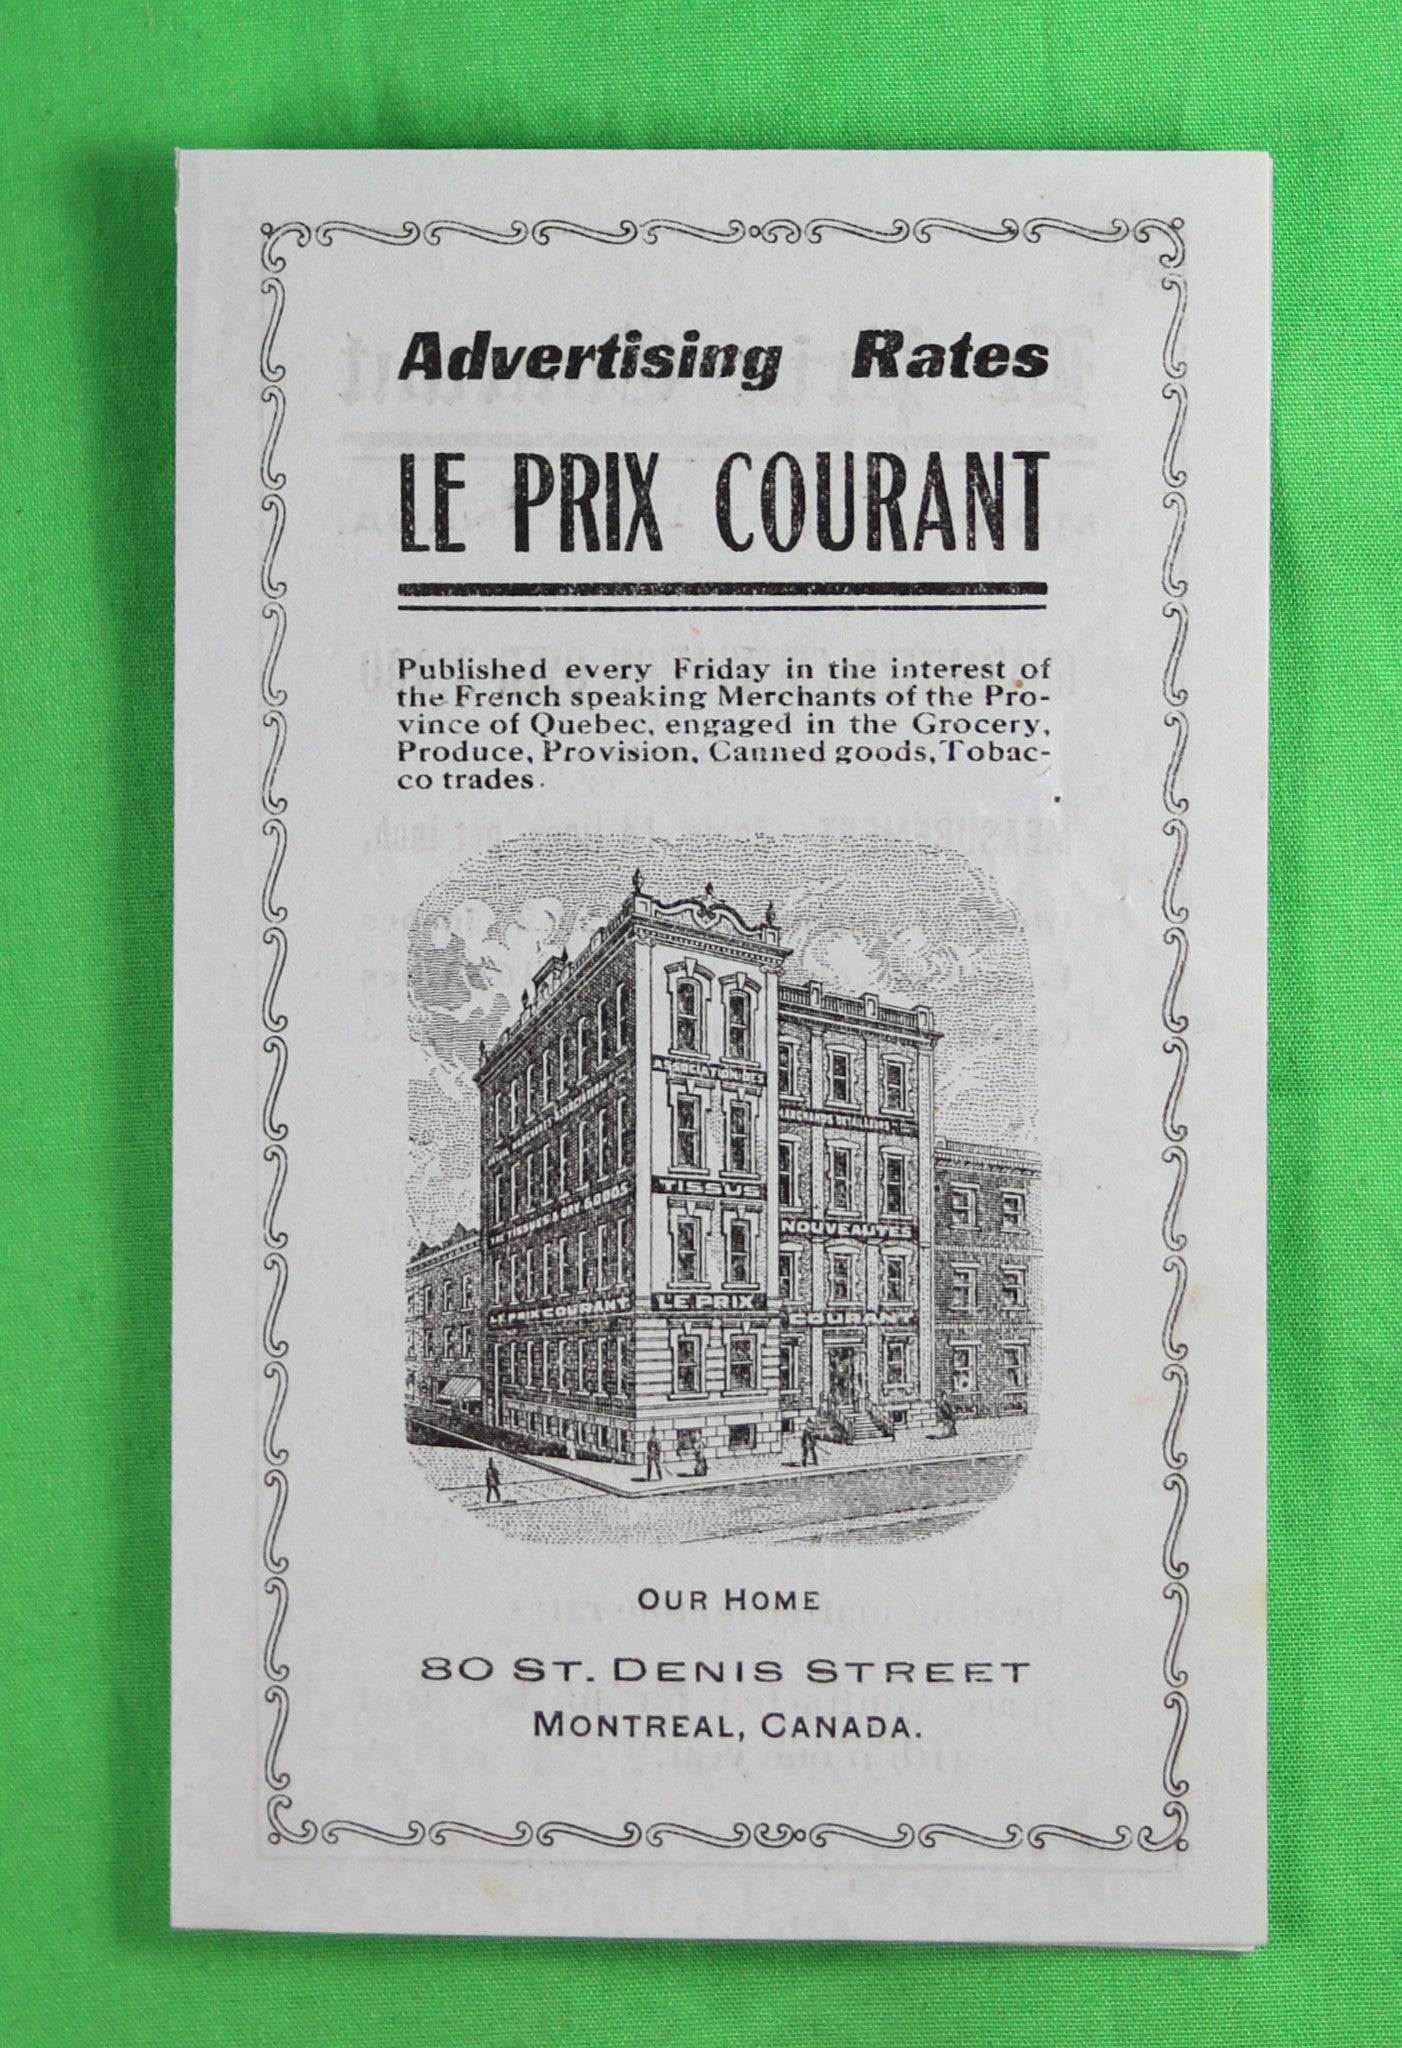 1910 advertising rates for ‘Le Prix Courant’ newspaper Montreal Qc